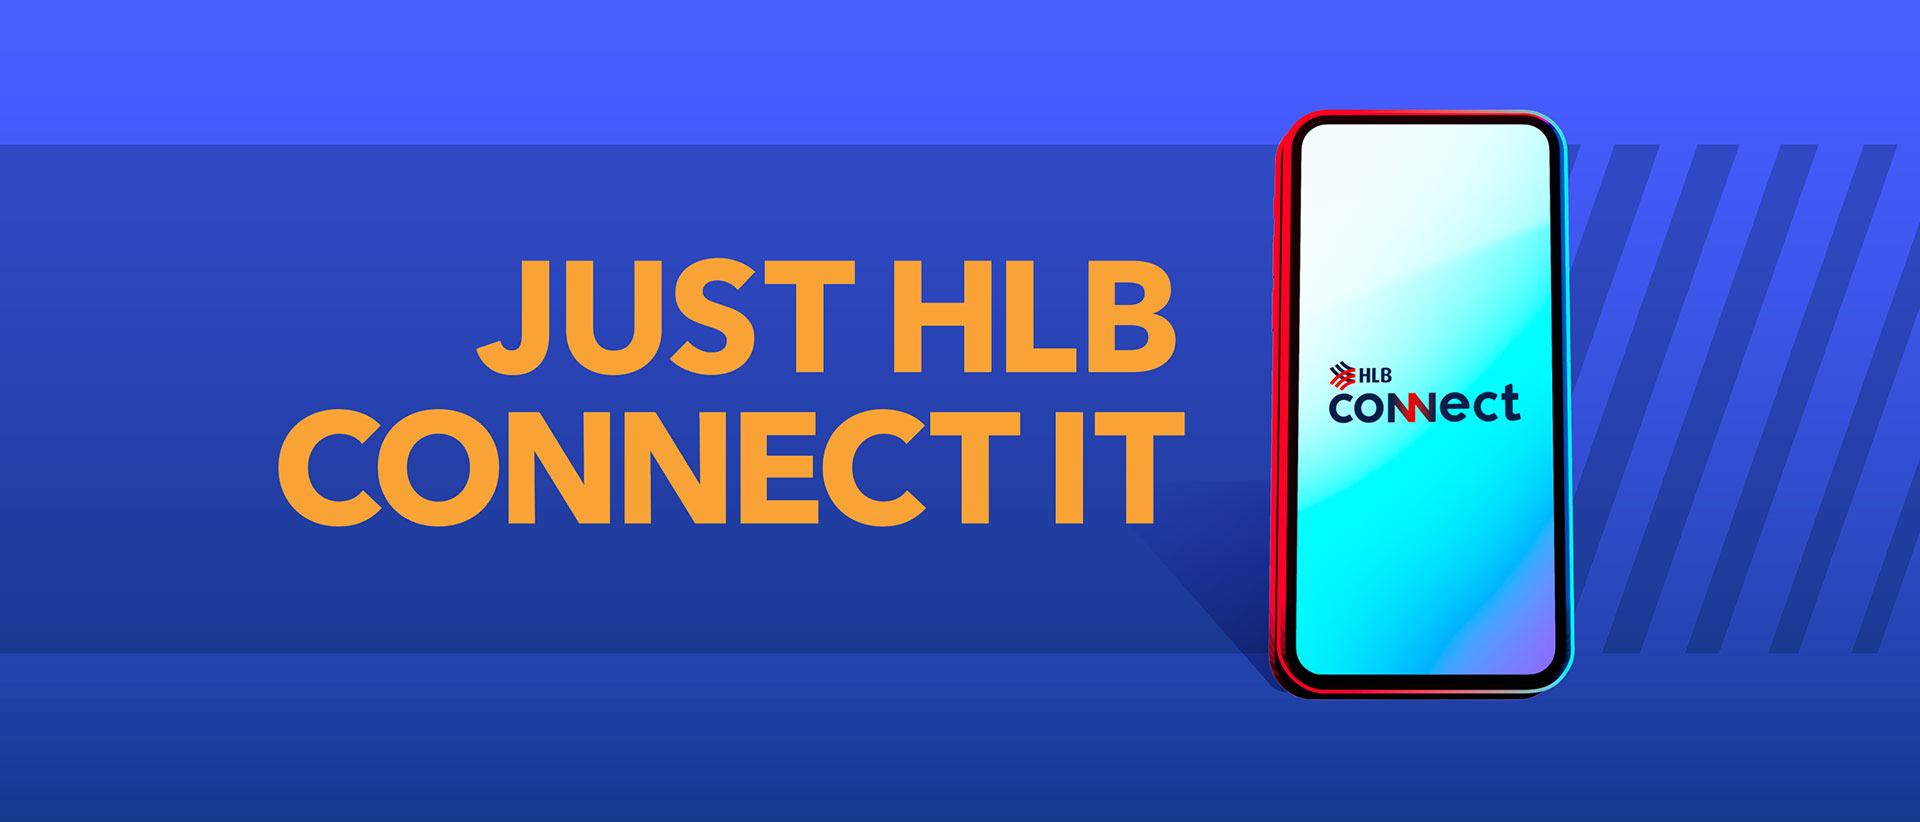 Just HLB Connect it